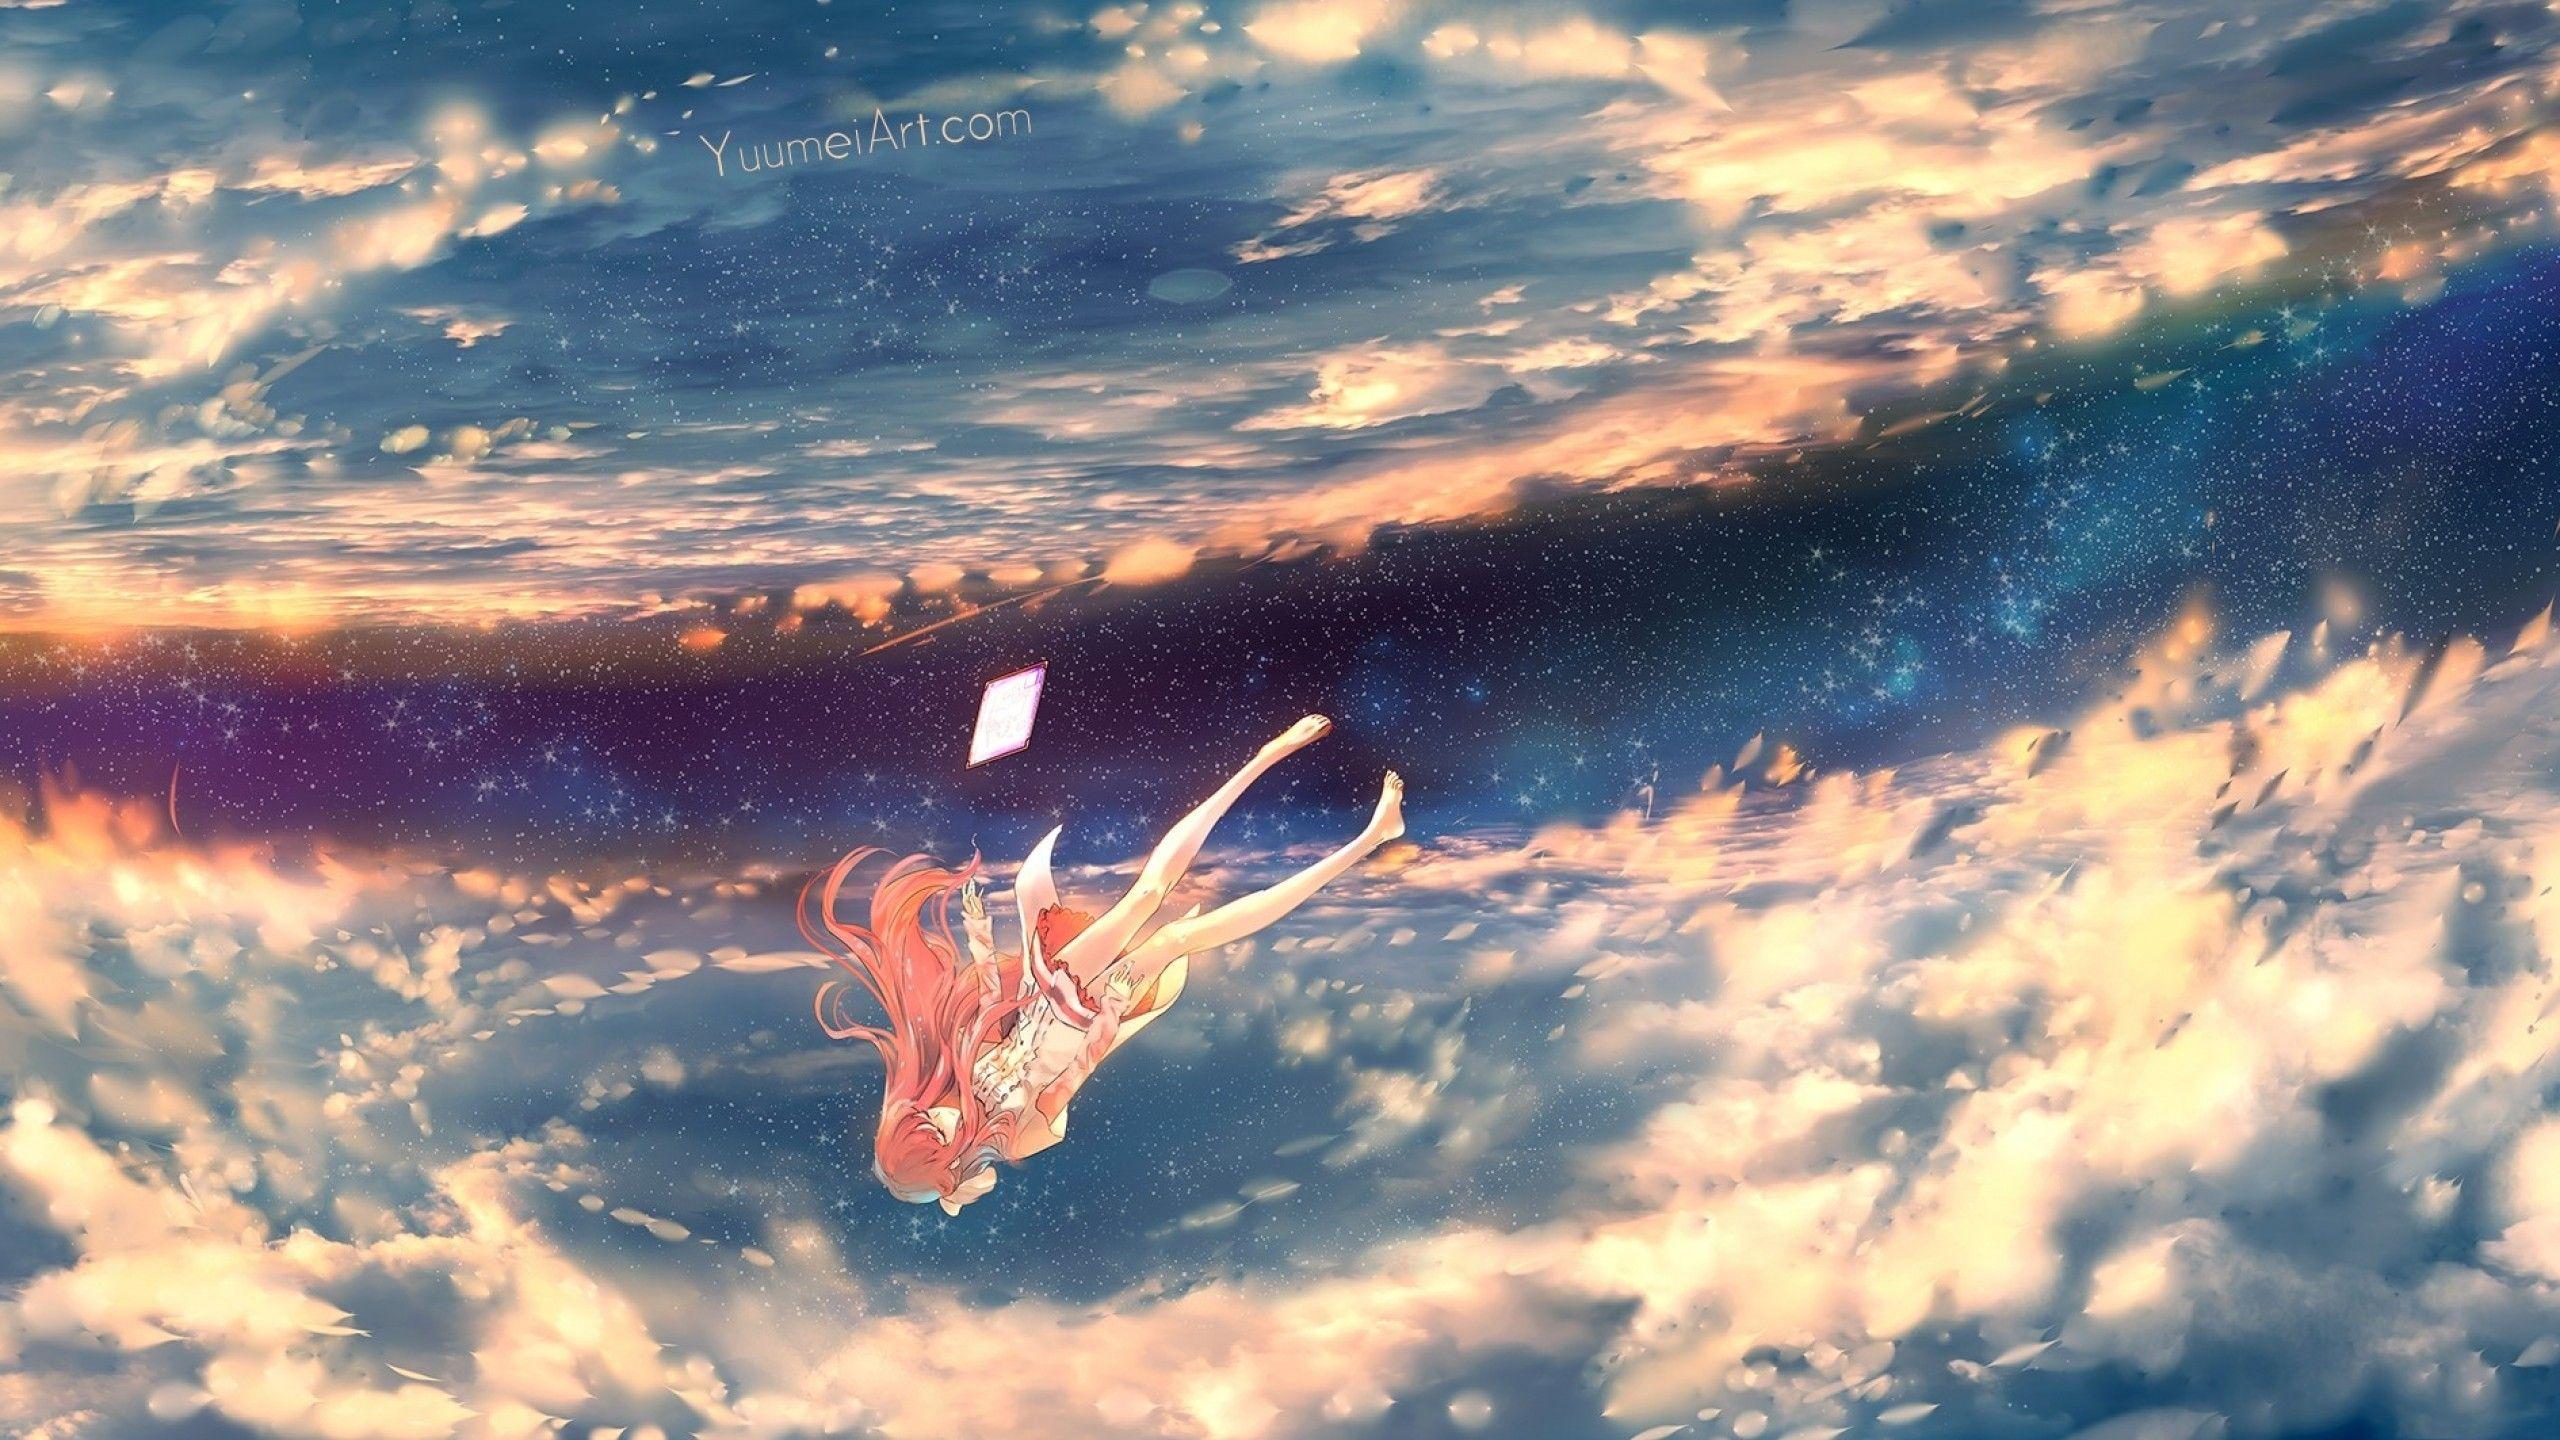 Download 2560x1440 Shelter, Rin, Falling Down, Sky, Stars, Clouds